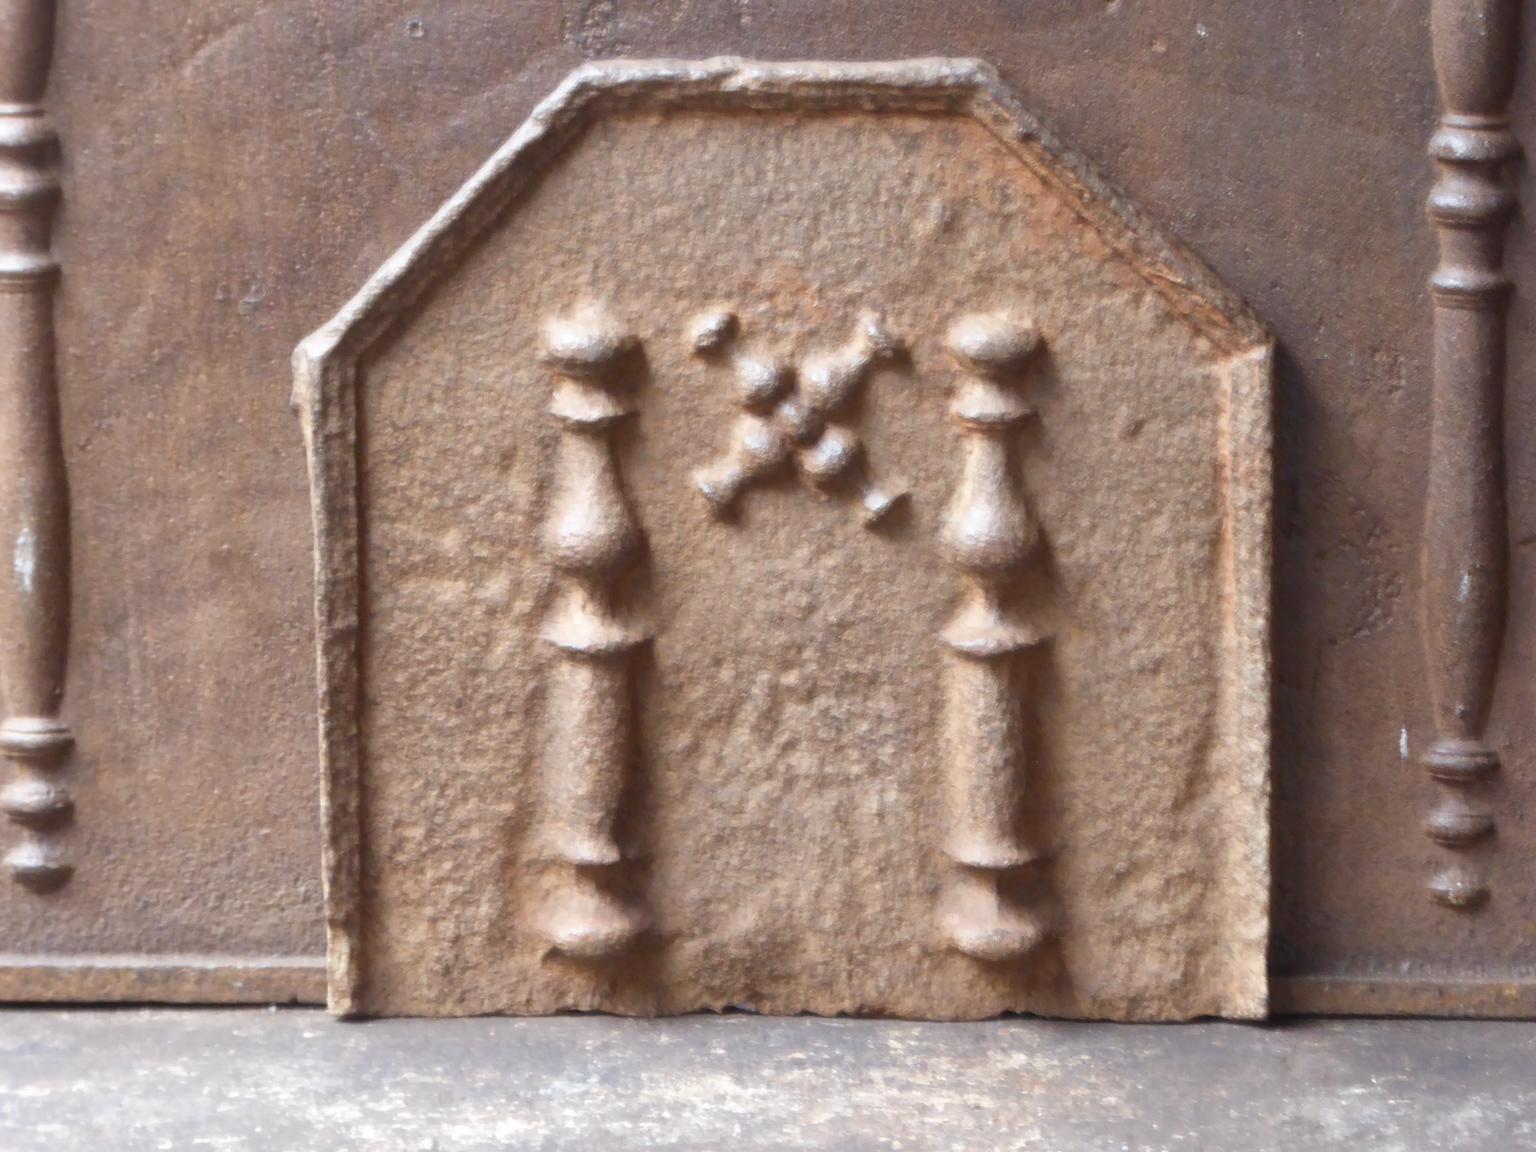 17th-18th century French fireback with a Saint Andrew's cross and two pillars of Hercules. Saint Andrew is said to have been martyred on a cross in this shape. The cross is since then a sign for humility and sacrifice. The pillars of Hercules